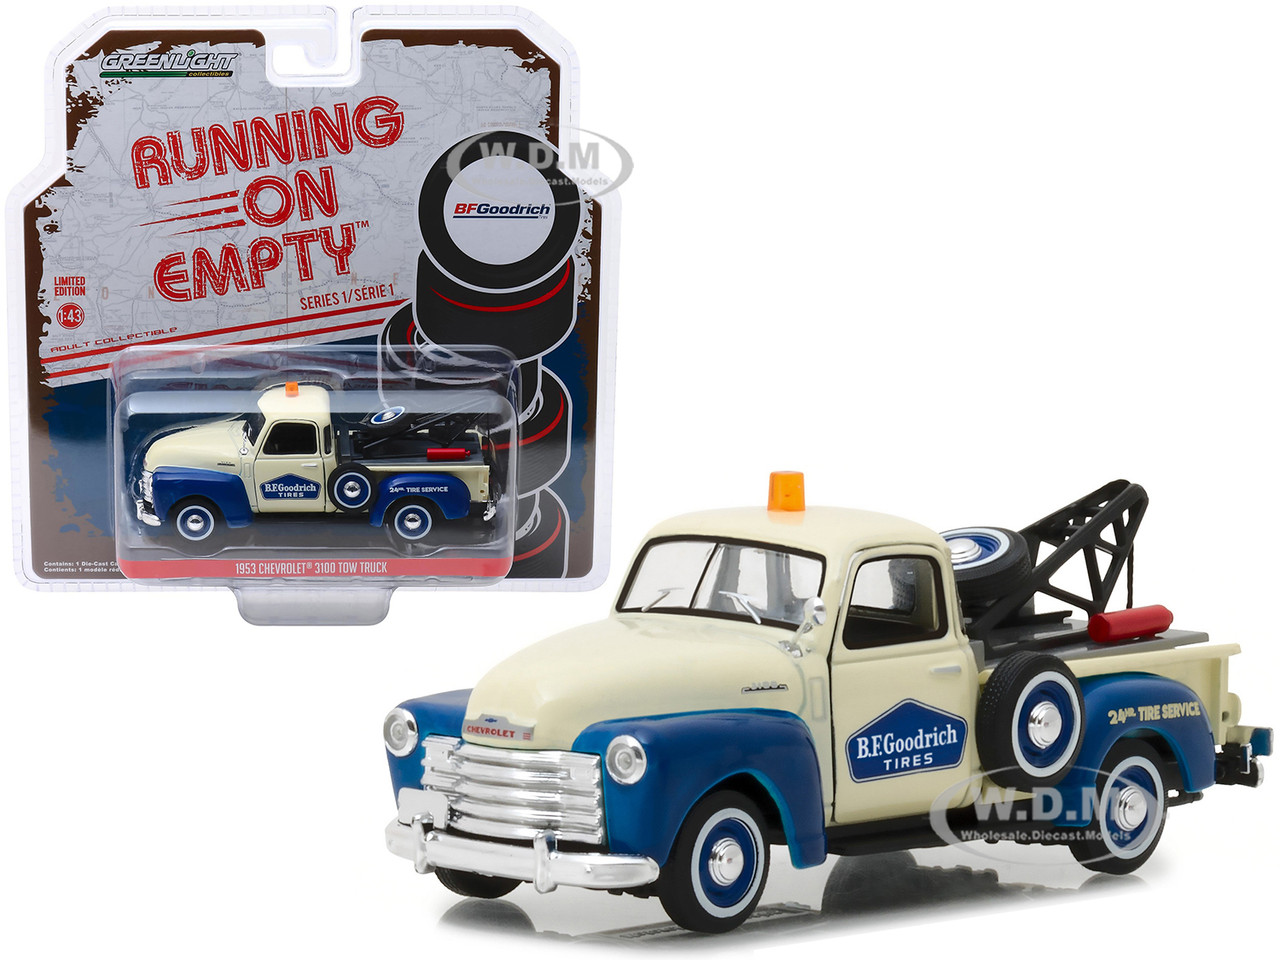 1953 Chevrolet 3100 Tow Truck Bfgoodrich Service Cream And Blue Running On Empty Release 1 1 43 Diecast Model Car By Greenlight